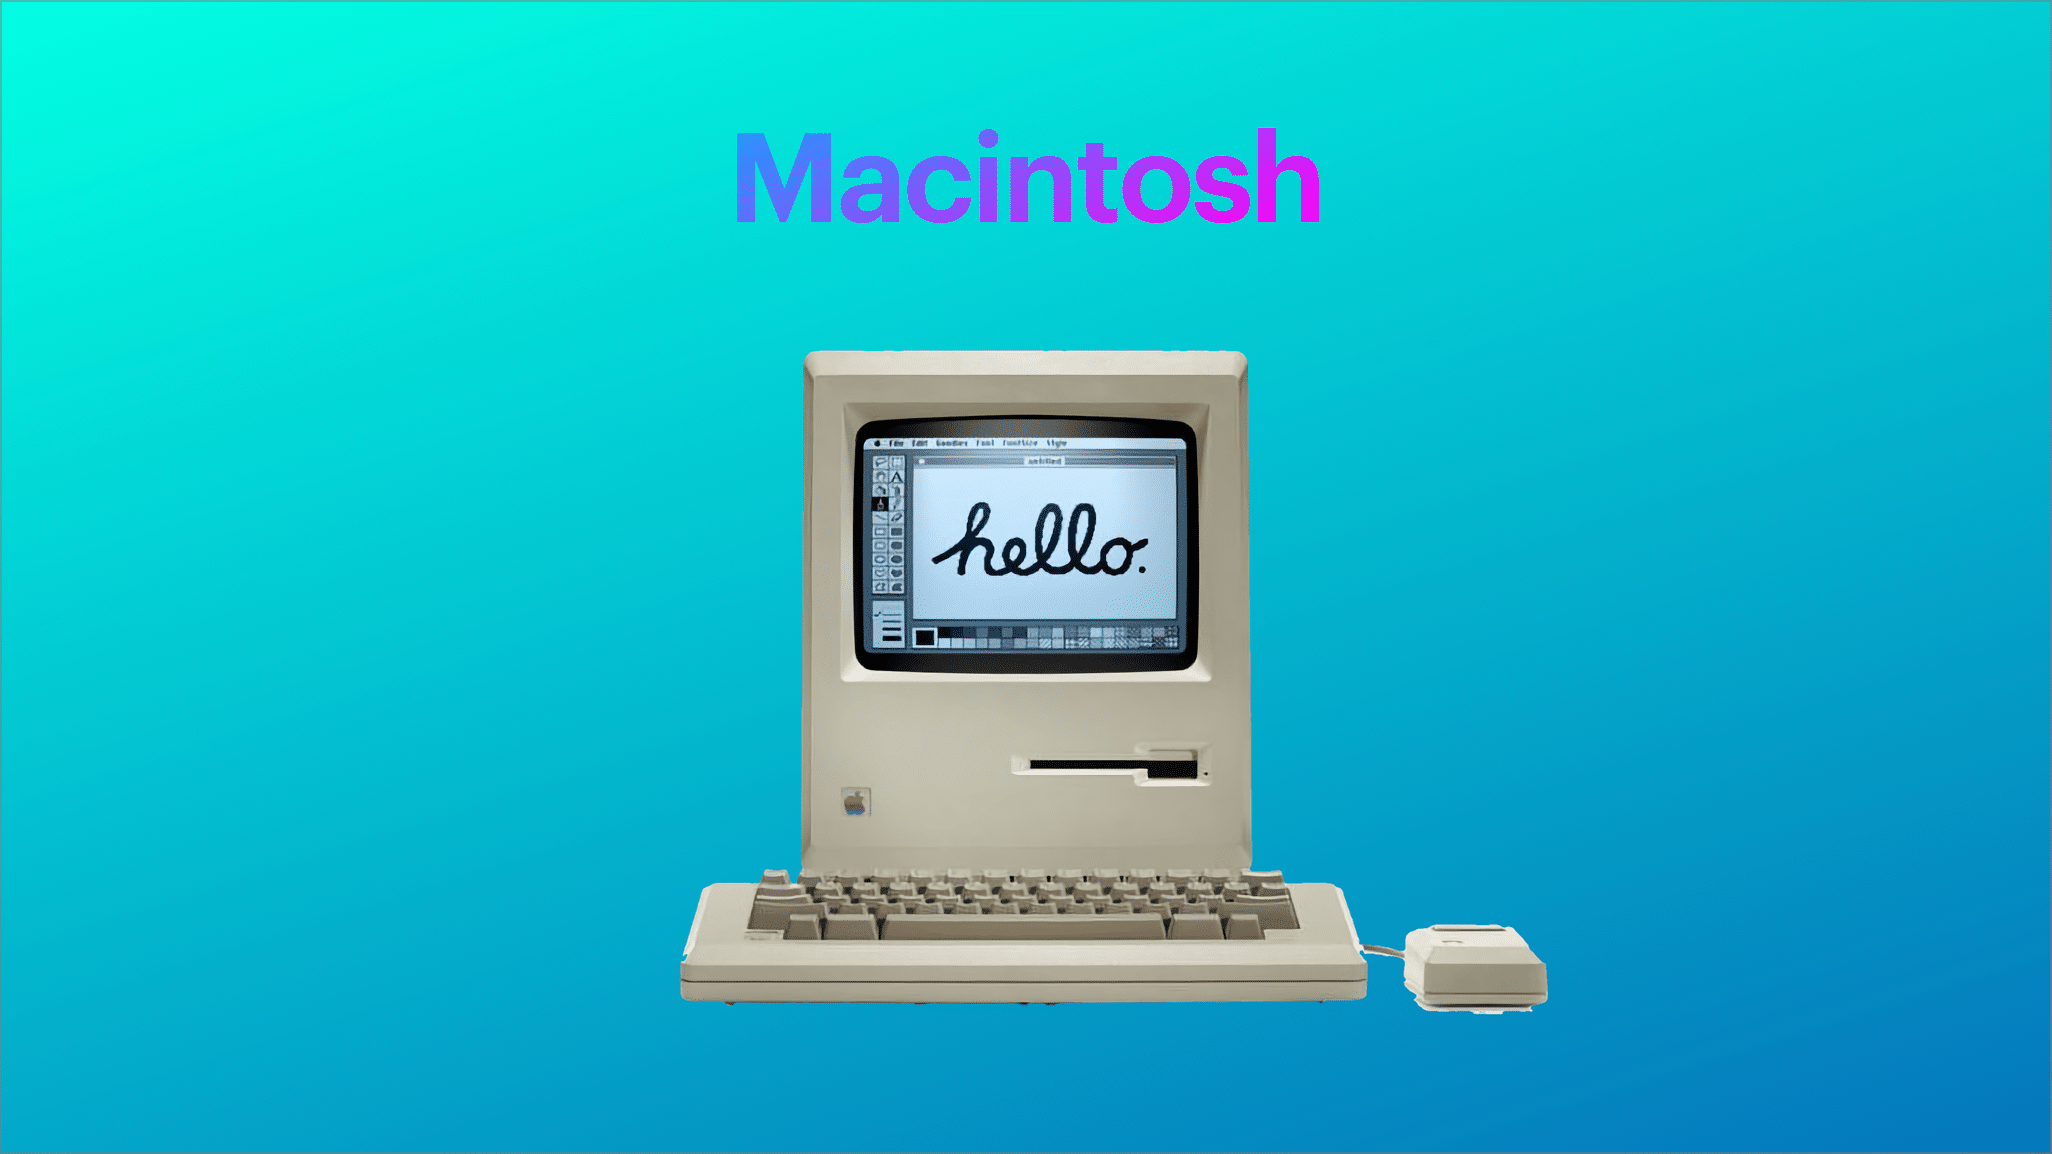 Remembering My Story of Owning the Original Macintosh 128K — 1985